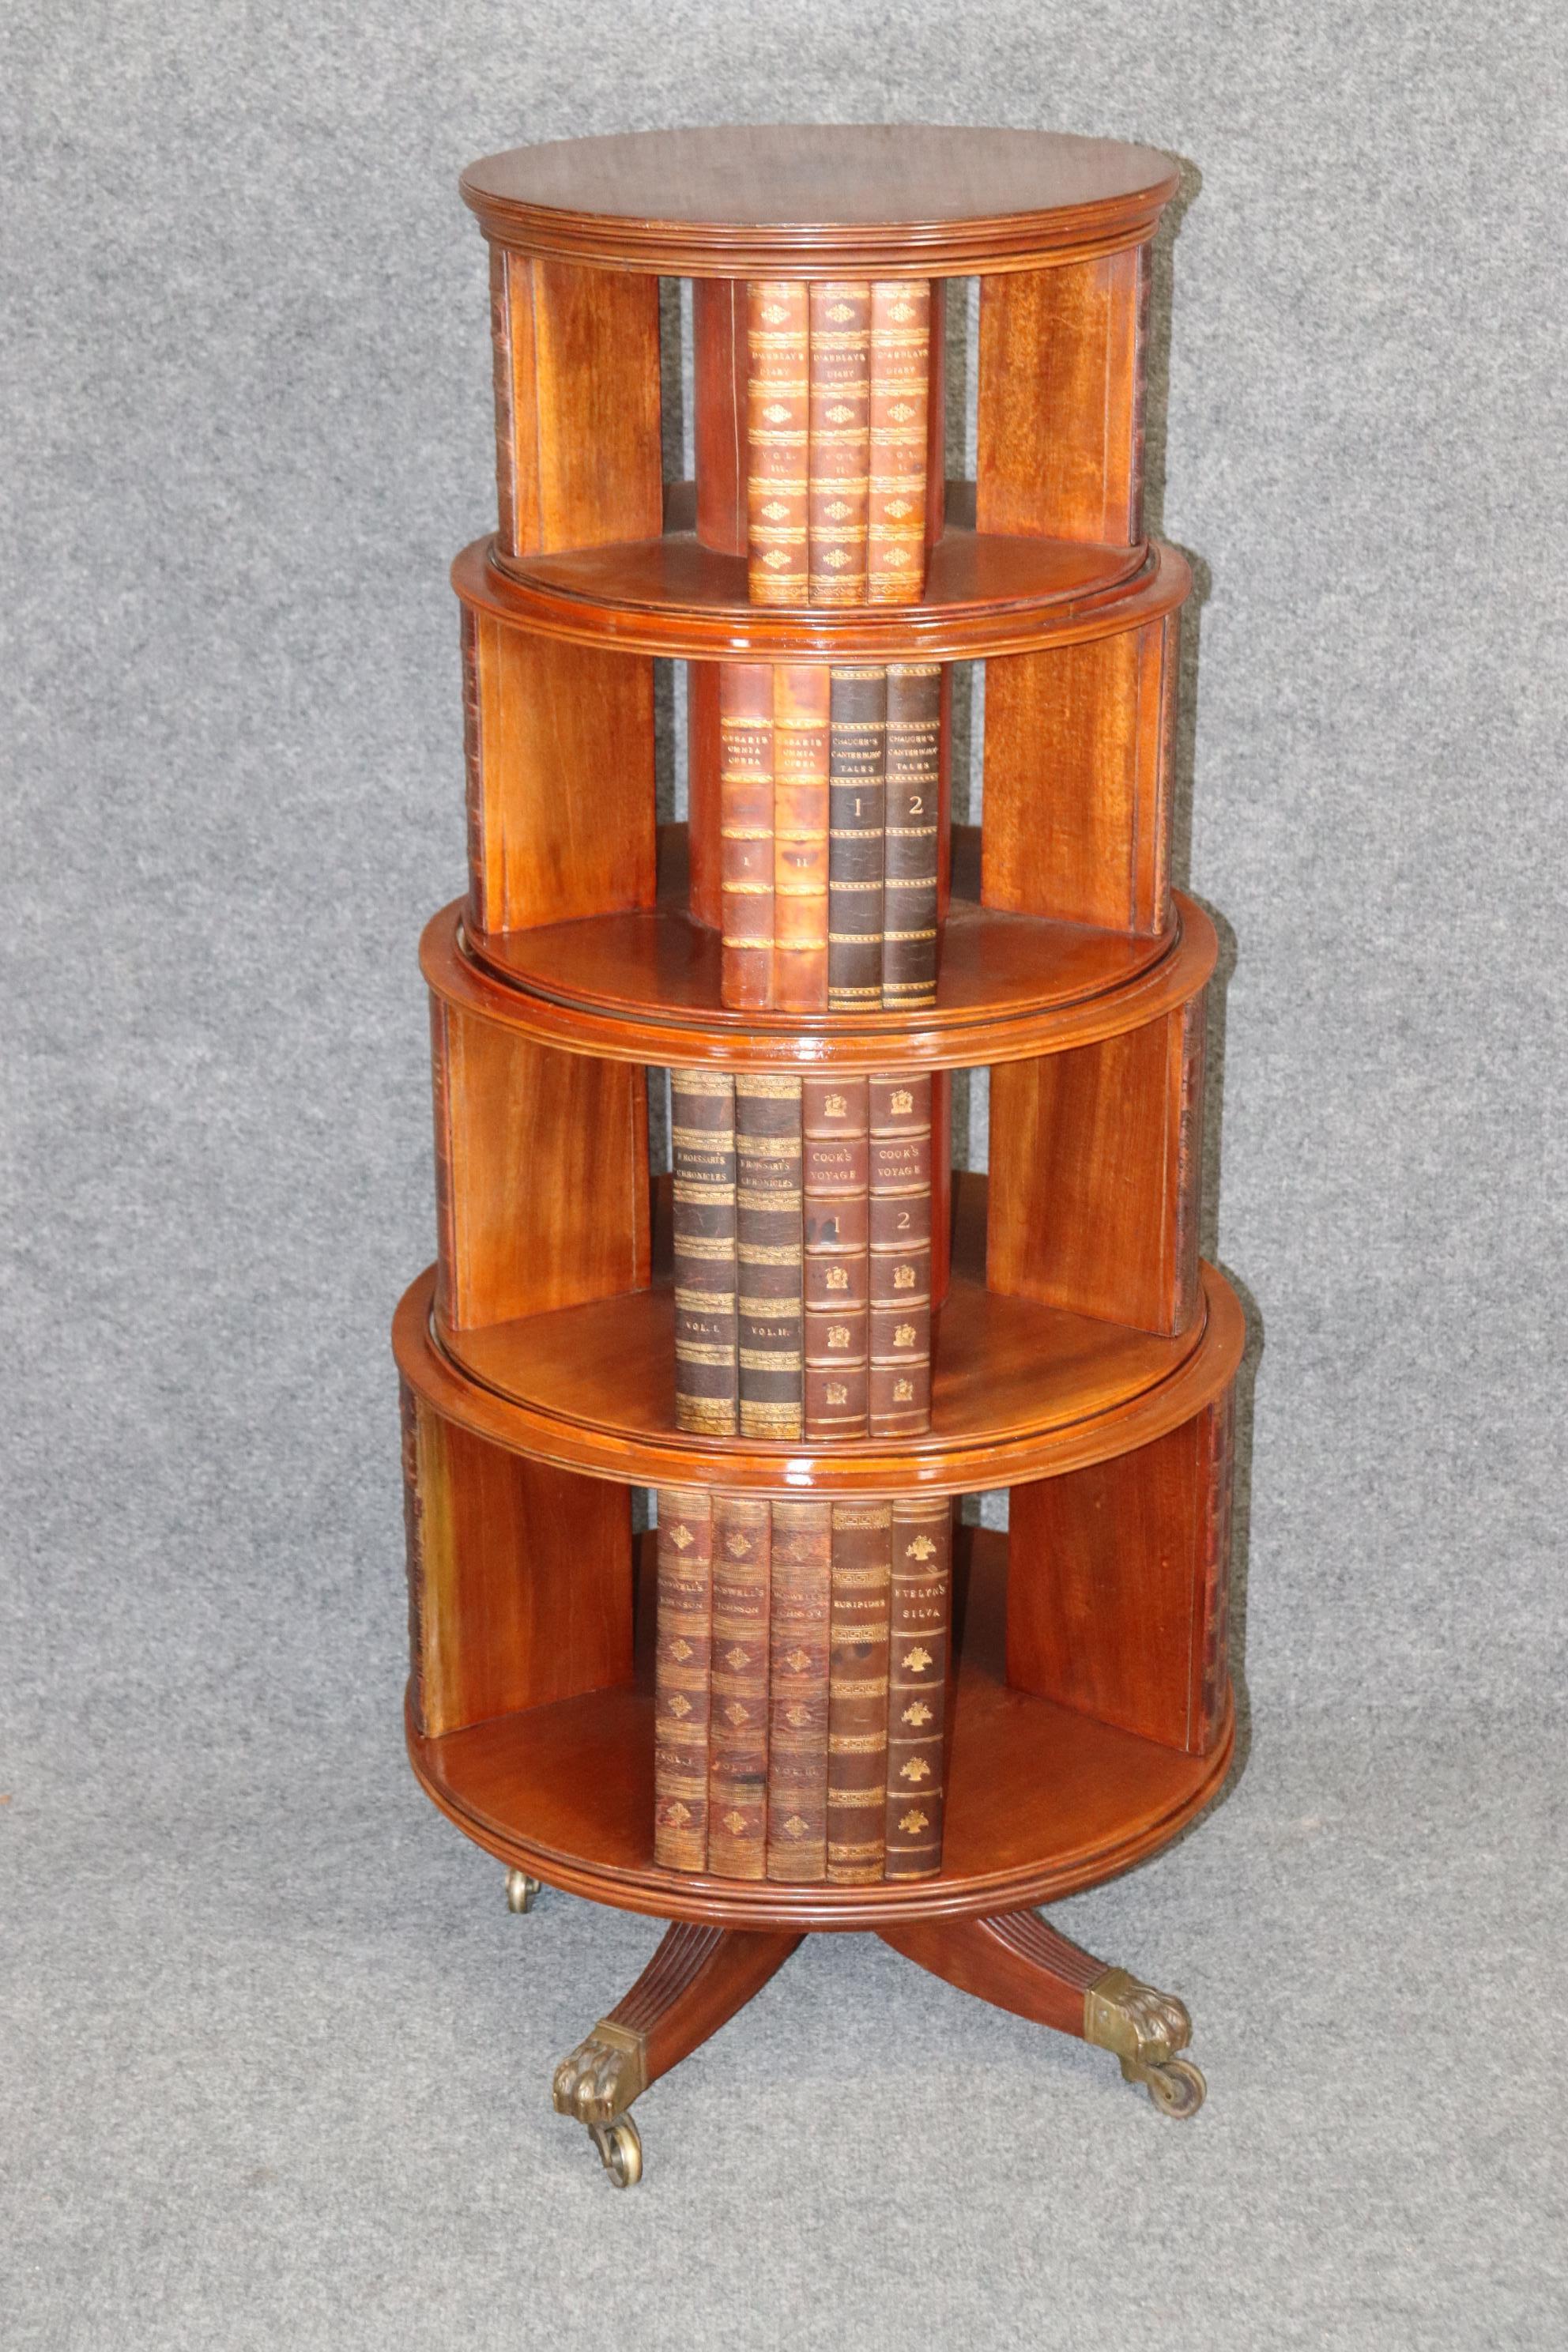 This is a fantastically rare item indeed! This is a George III style solid mahogany revolving bookcase with some of the greatest books ever written from Chaucer and others as dividers (their leather spines not the actual books) and the piece makes a